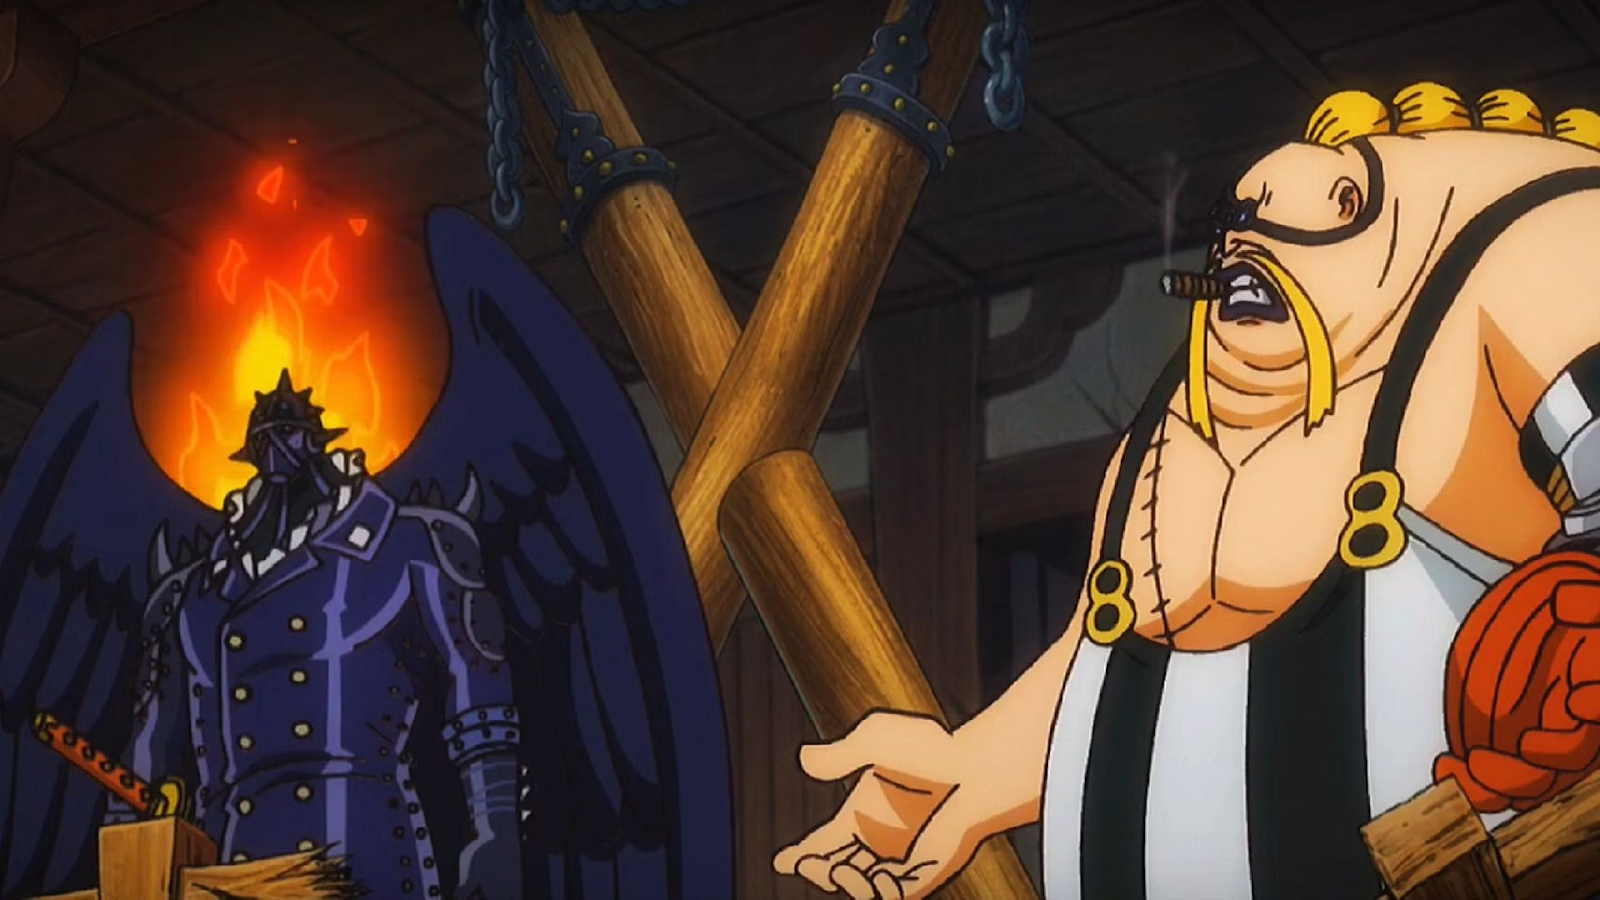 Who is Jack in One Piece?